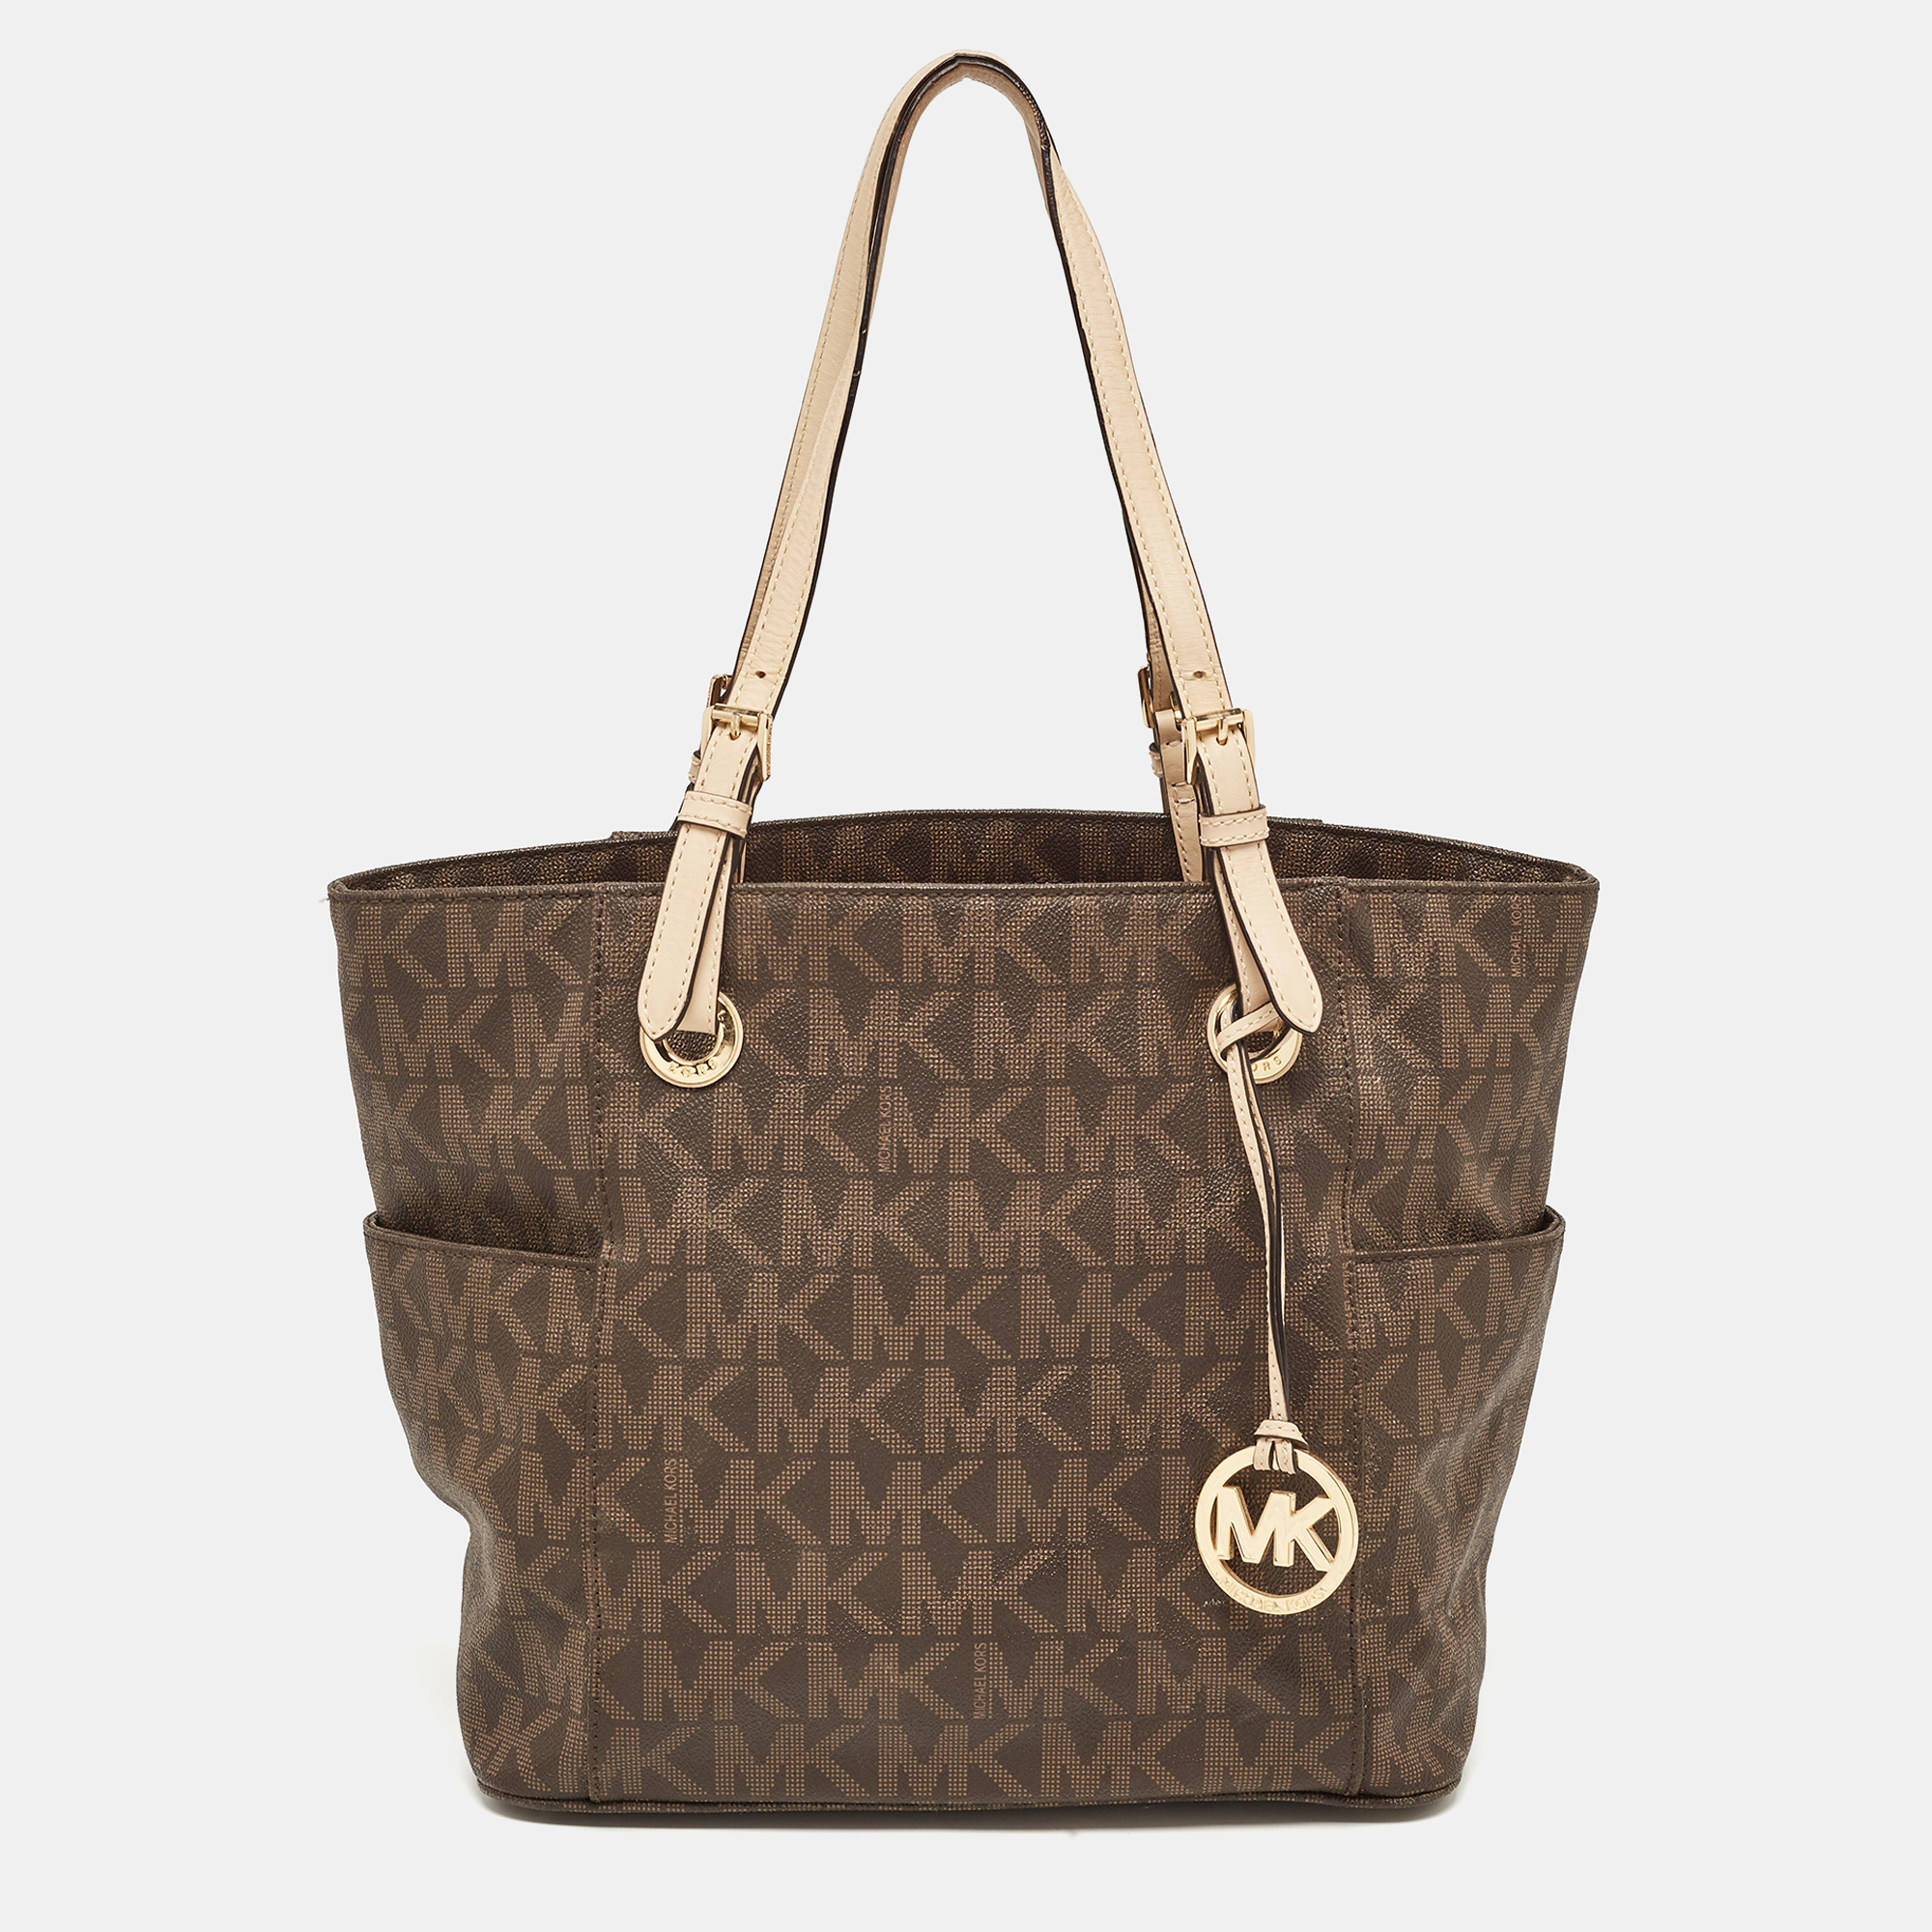 

MICHAEL Michael Kors Dark Brown Signature Coated Canvas and Leather Jet Set Tote